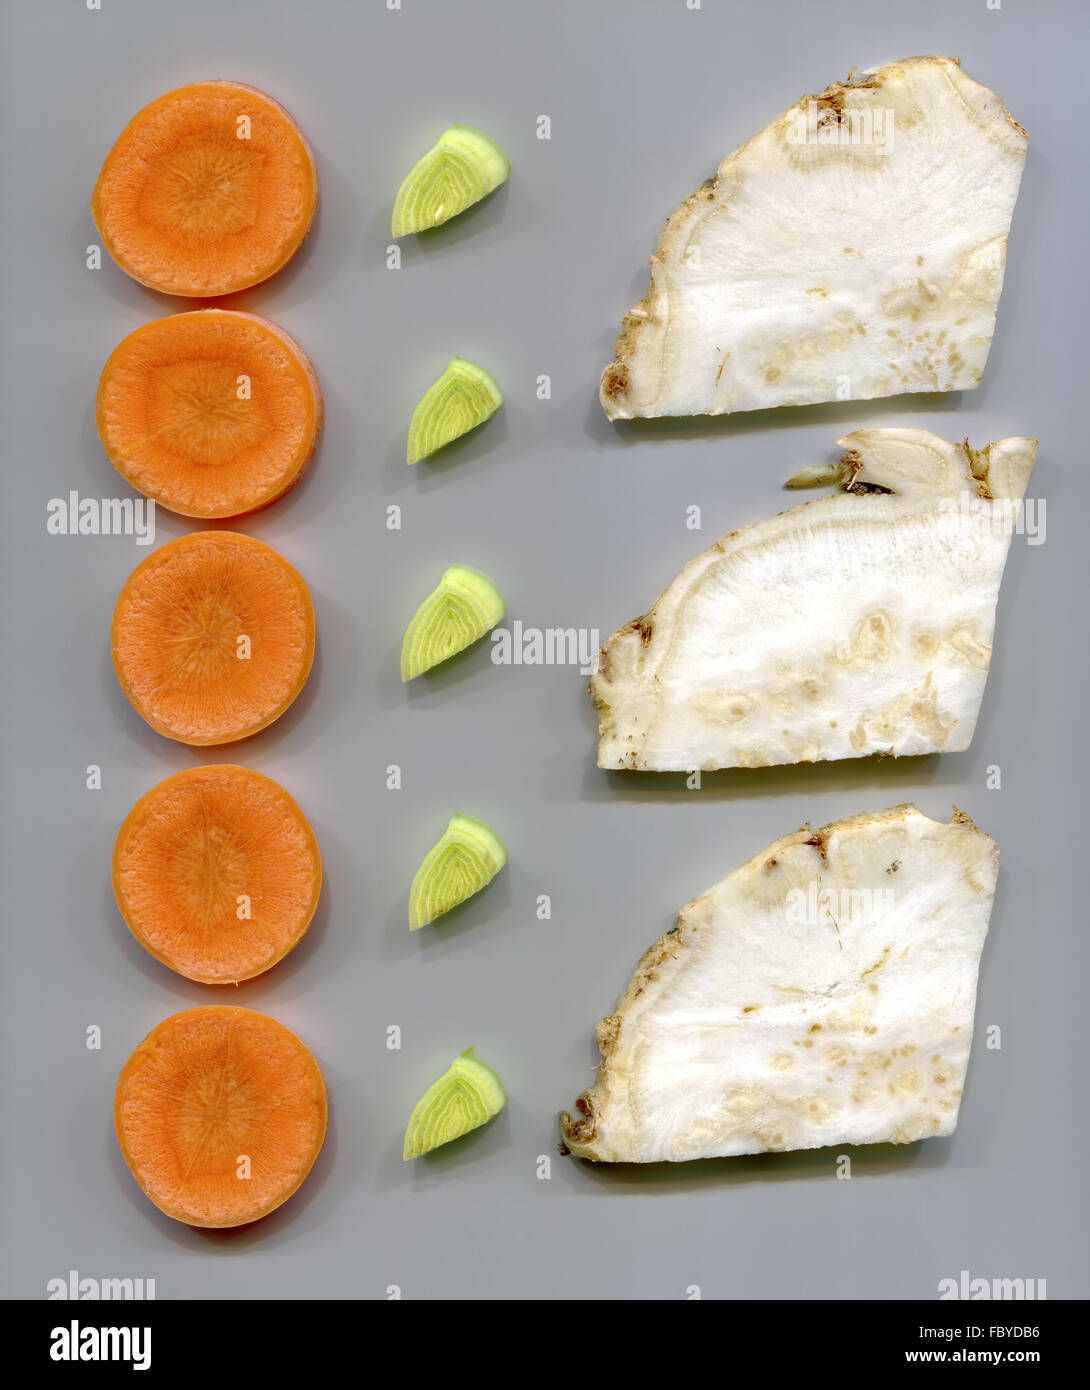 slices of carrots, leek and knob celery Stock Photo